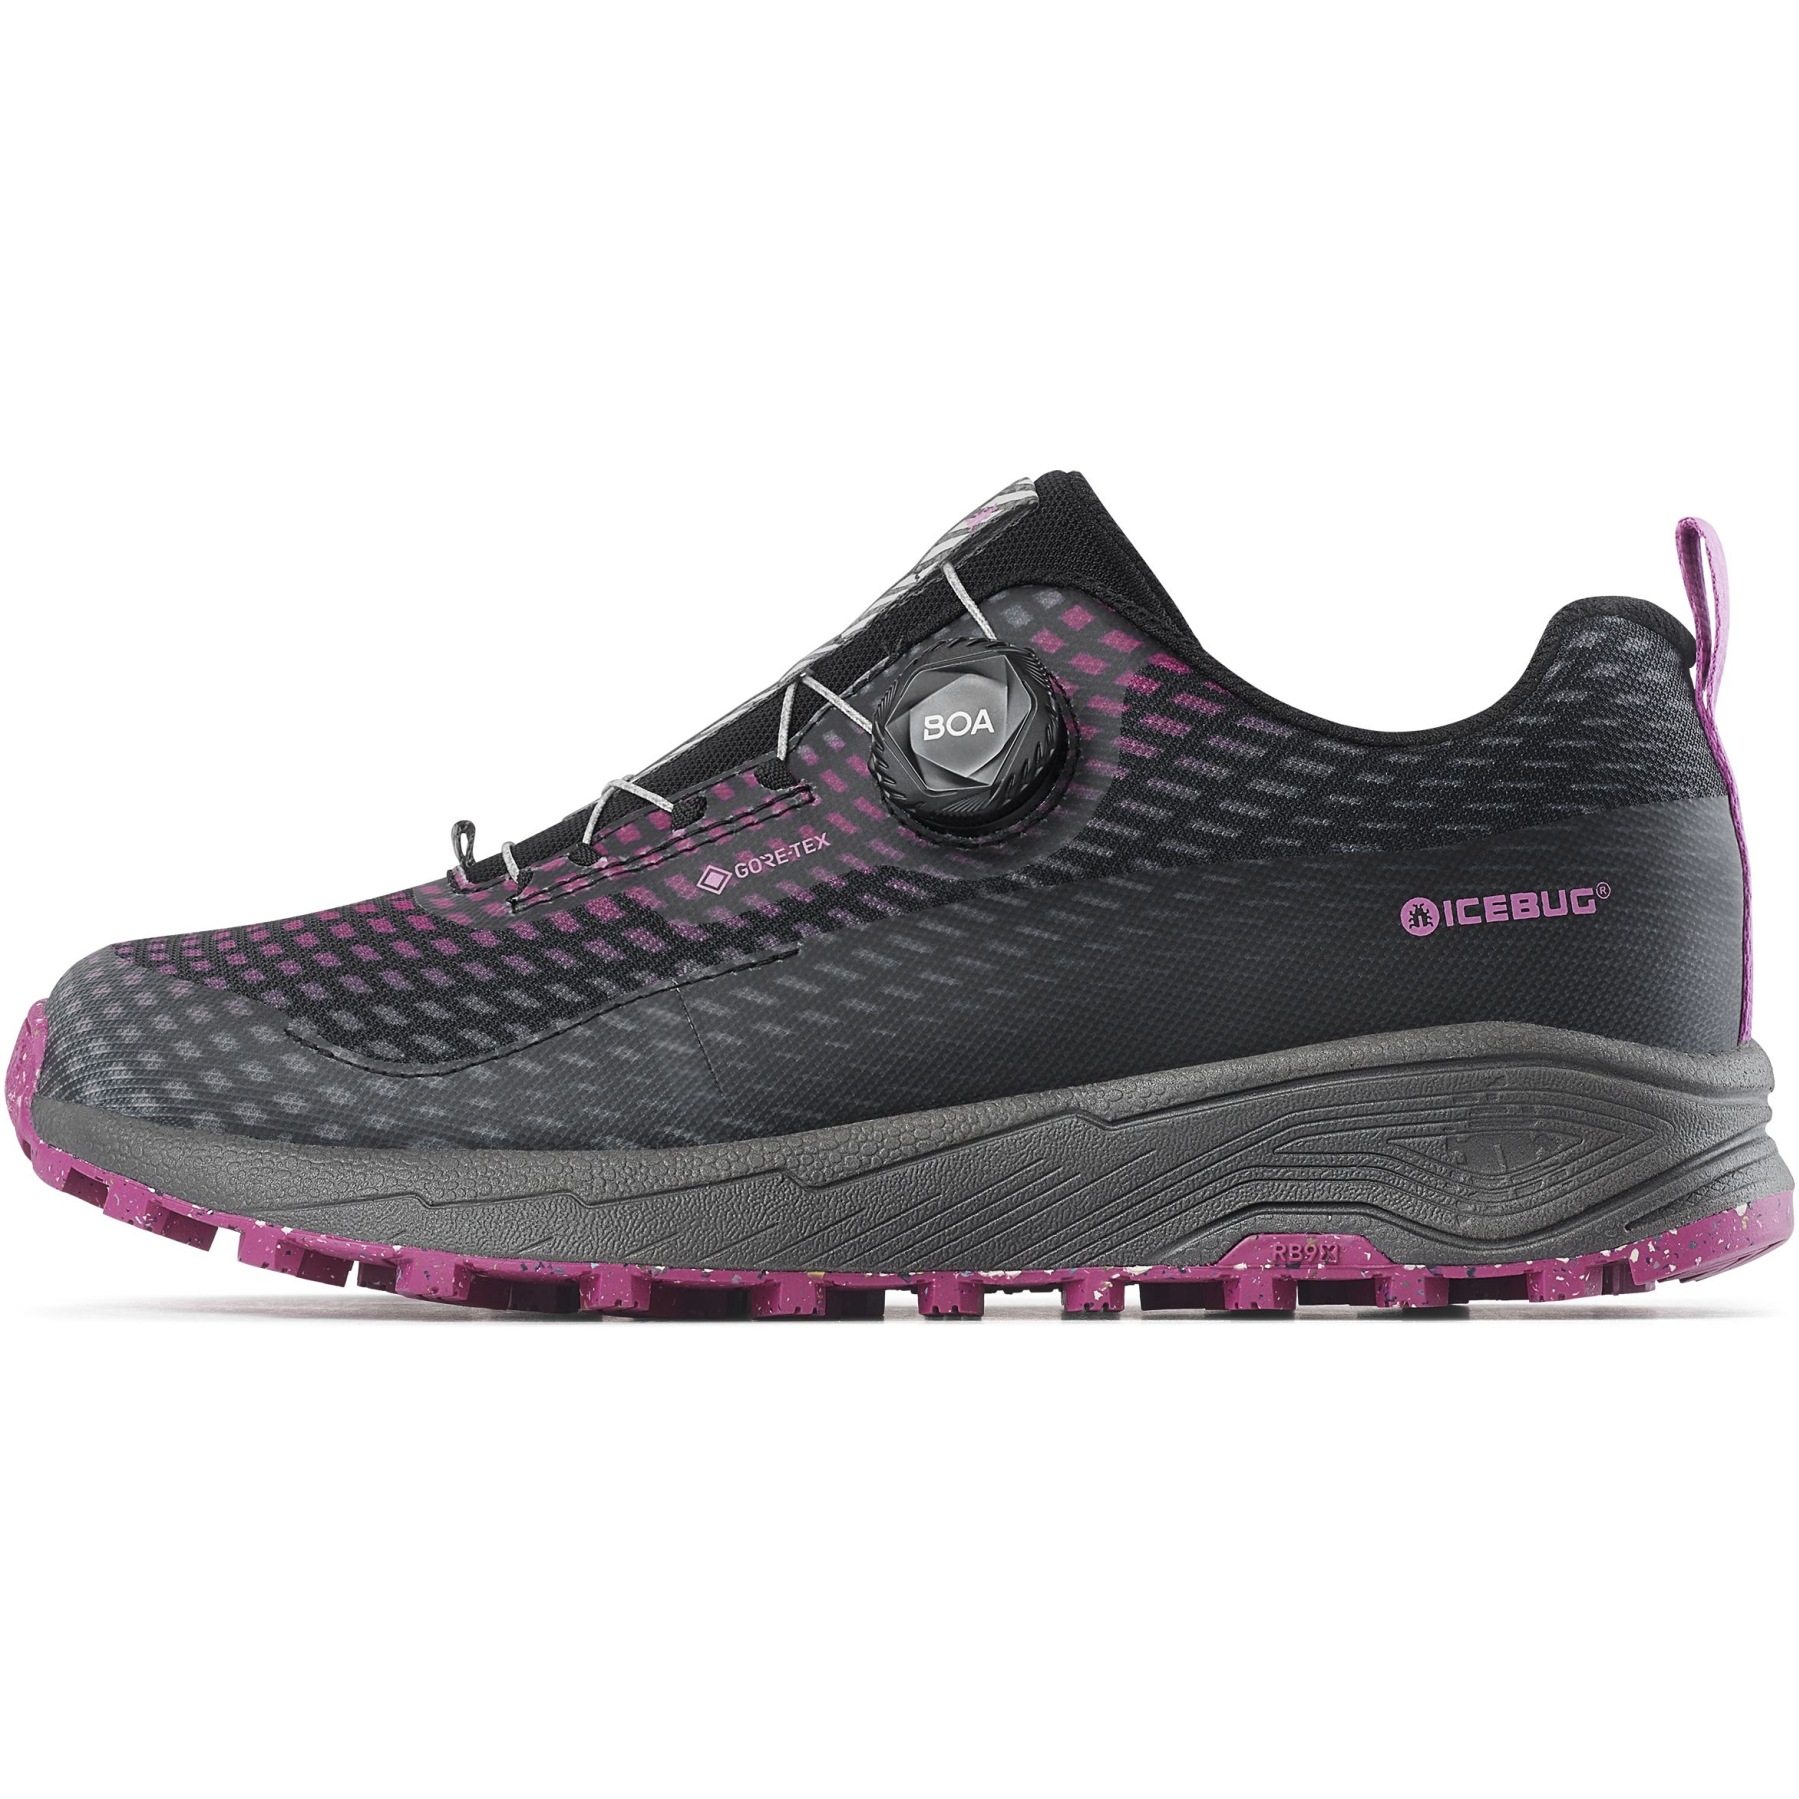 Image of Icebug Haze W RB9X GTX Women's Shoes - orchid/stone